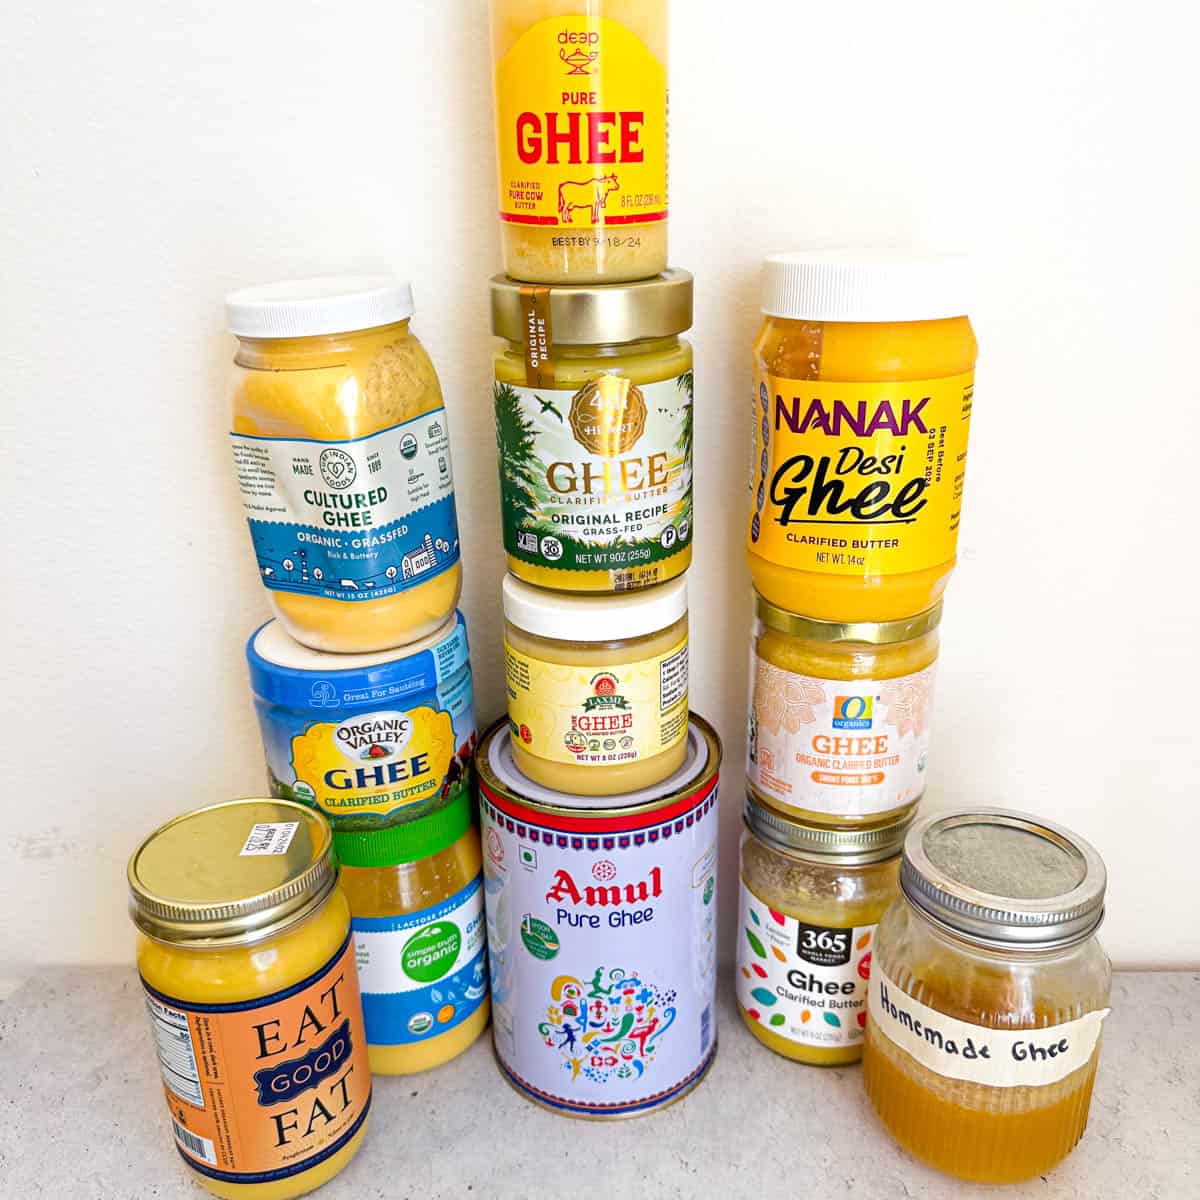 11 different ghee brand jars and 1 homemade jar. The 11 brands from left to right are Ancient Organics, Pure Indian foods, Organic Valley, 4th & Heart, Laxmi Ghee, Amul, Nanak, O Organics, 365 Ghee, and Homemade ghee.